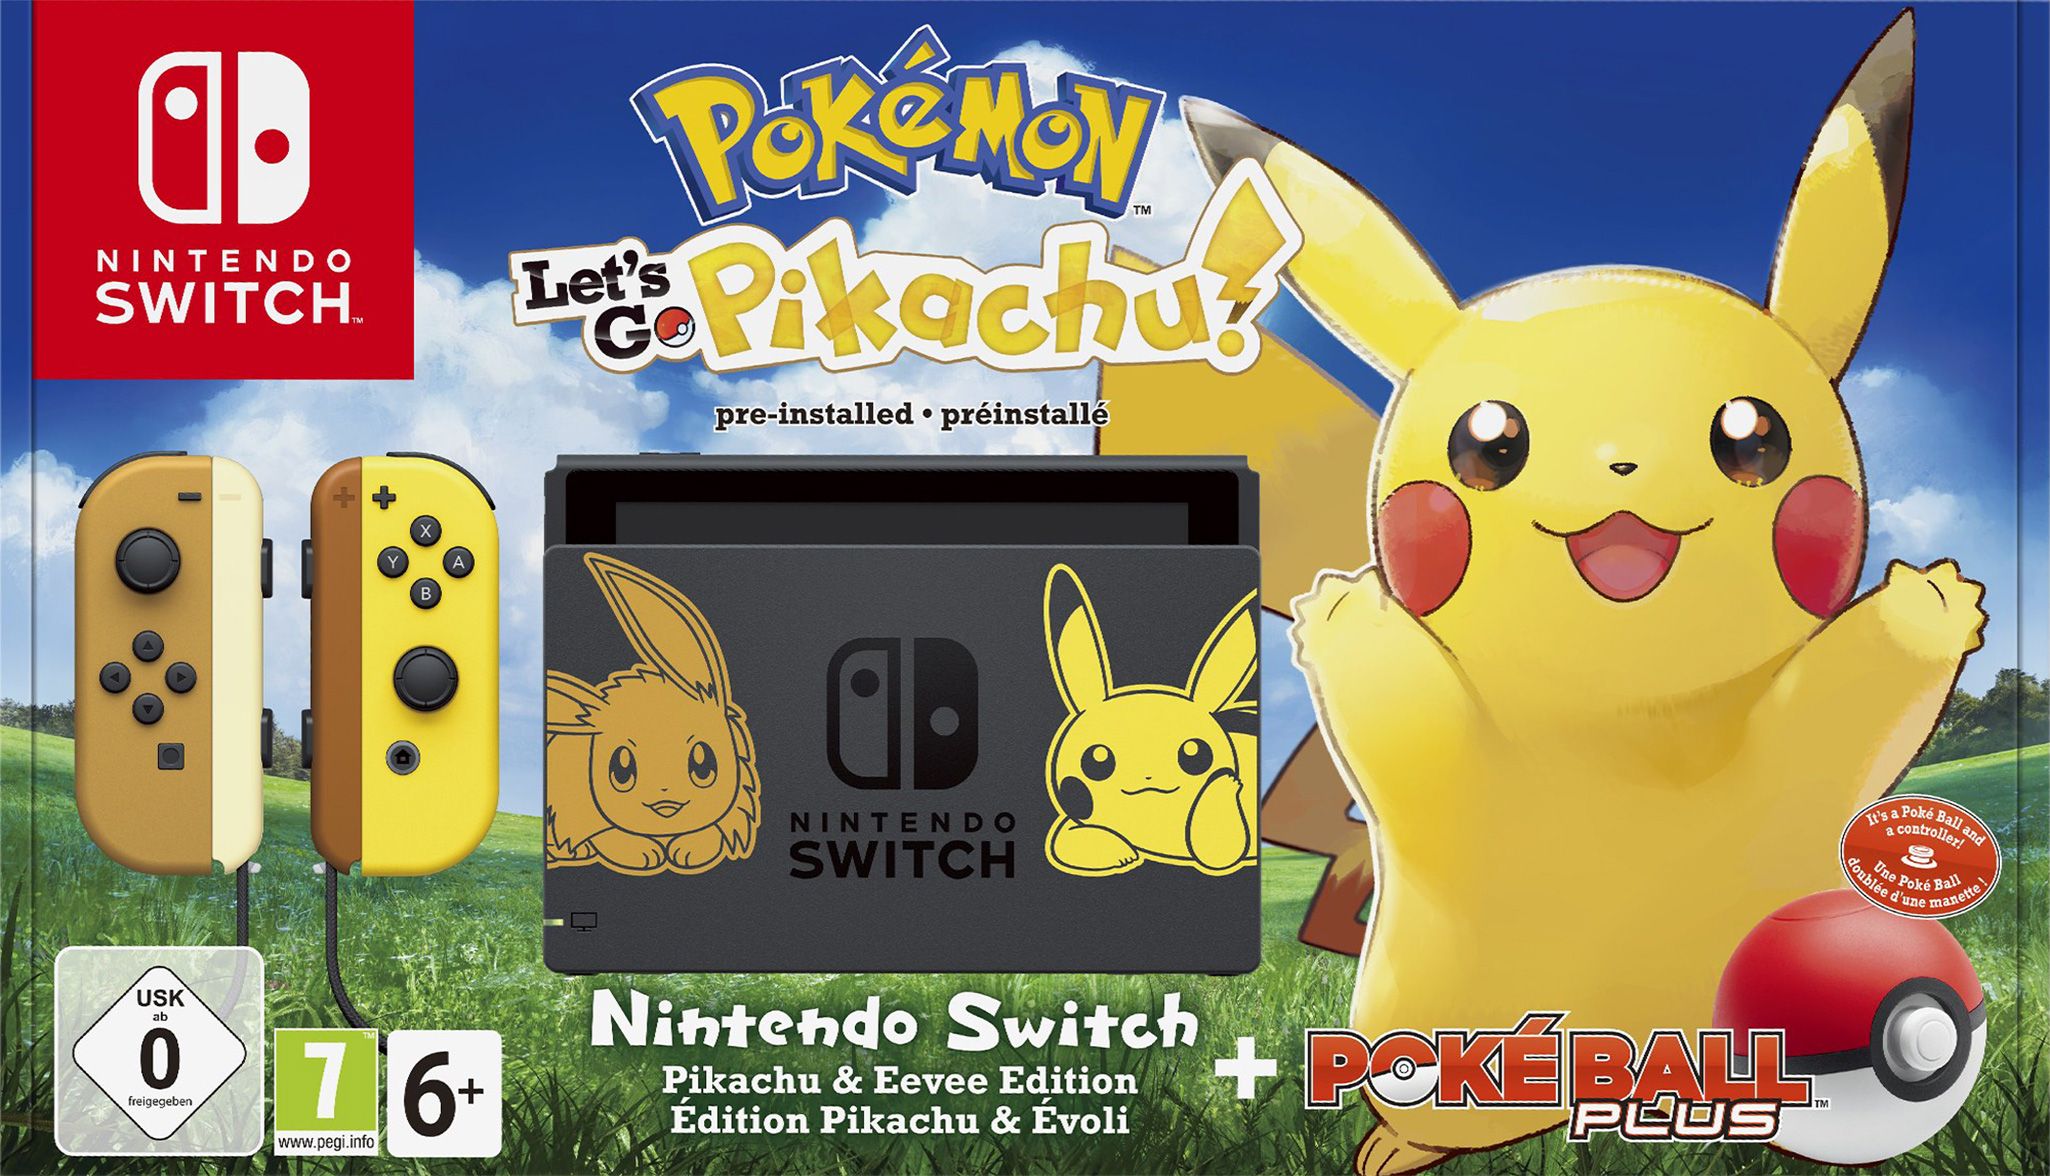 Nintendo Switch 32gb Console V1 Pikachu Eevee Limited Edition With Pokemon Lets Go Pikachu Pre Installed Pokeball Plus Ns Switchnew